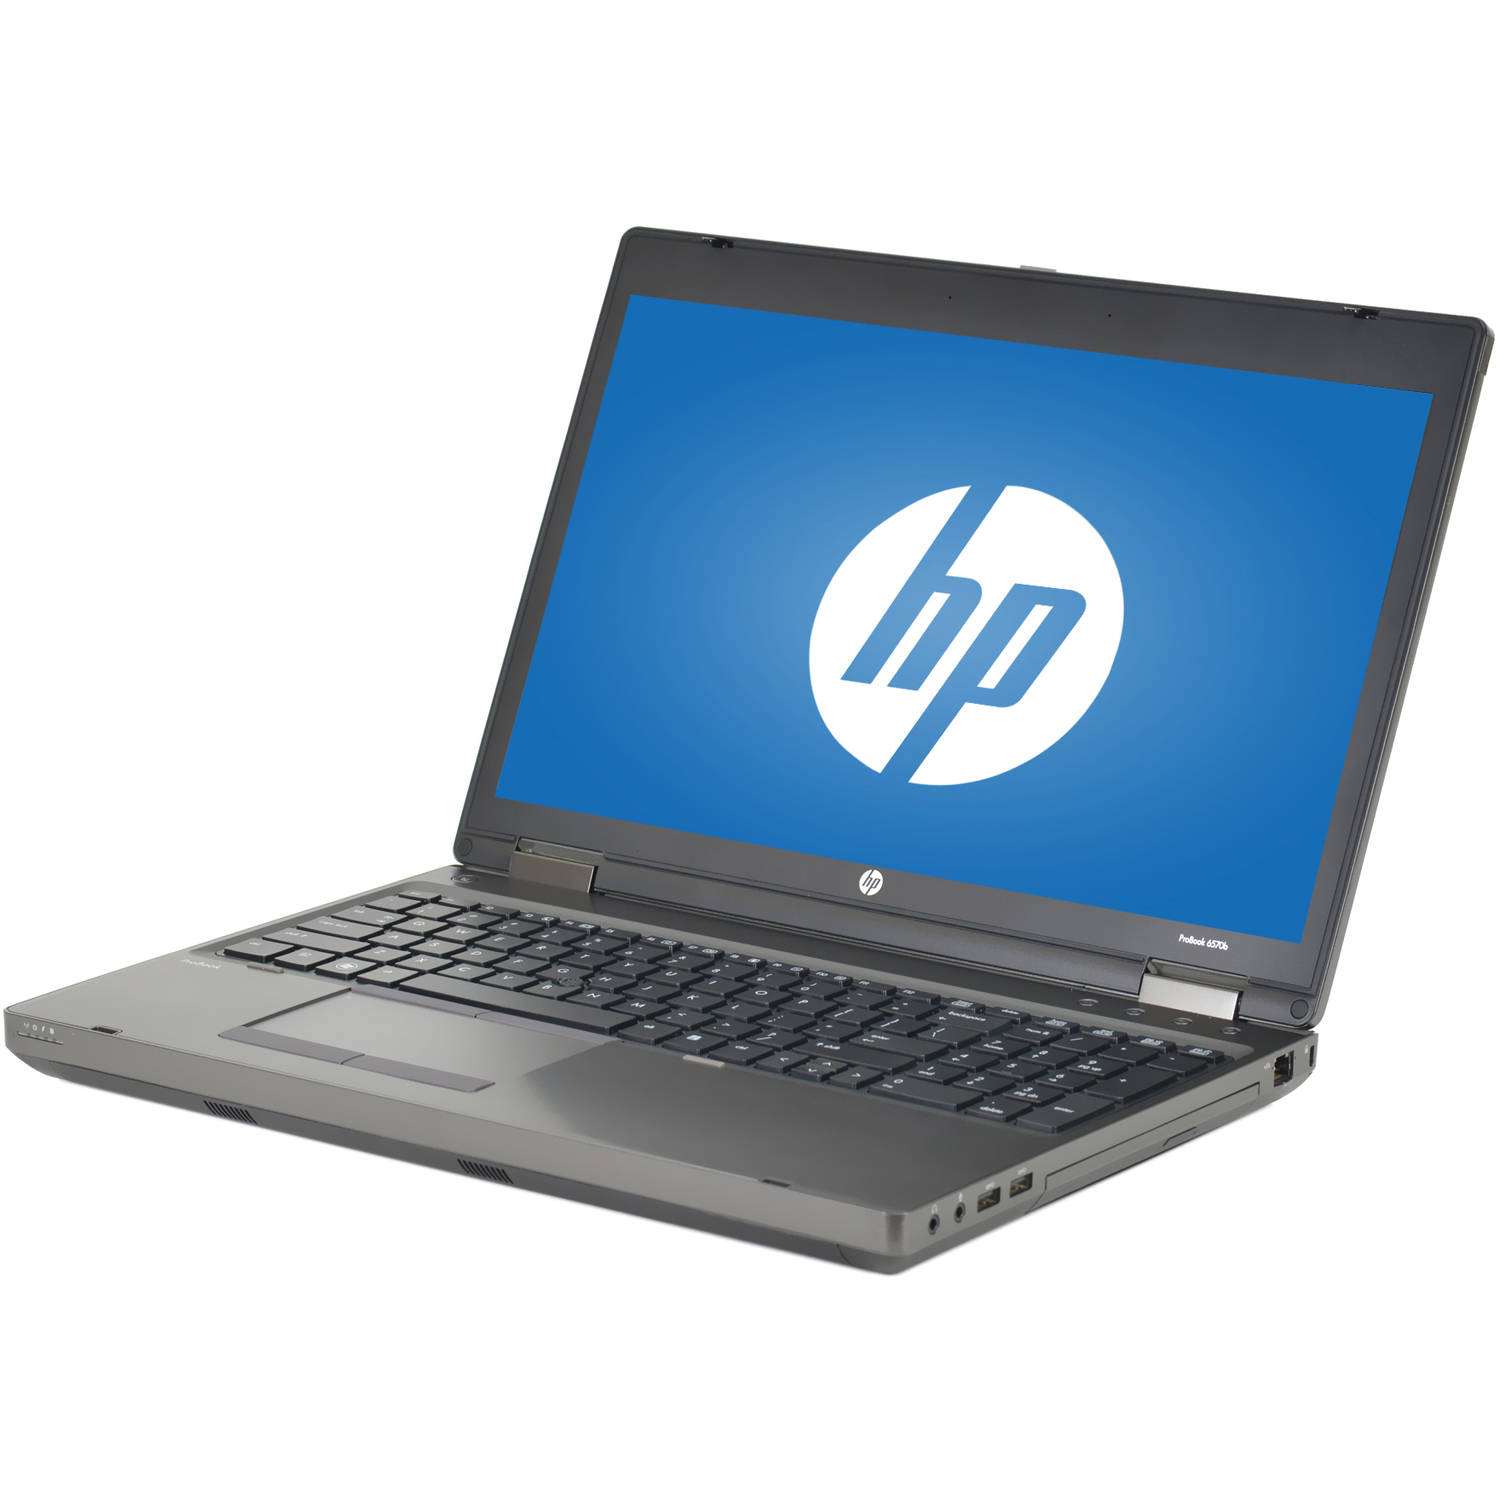 Restored HP 15.6" ProBook 6570B WA5-0877 Laptop PC with Intel Core i5-3320M Processor, 8GB Memory, 128GB Solid State Drive and Windows 10 Pro (Refurbished) - image 1 of 4